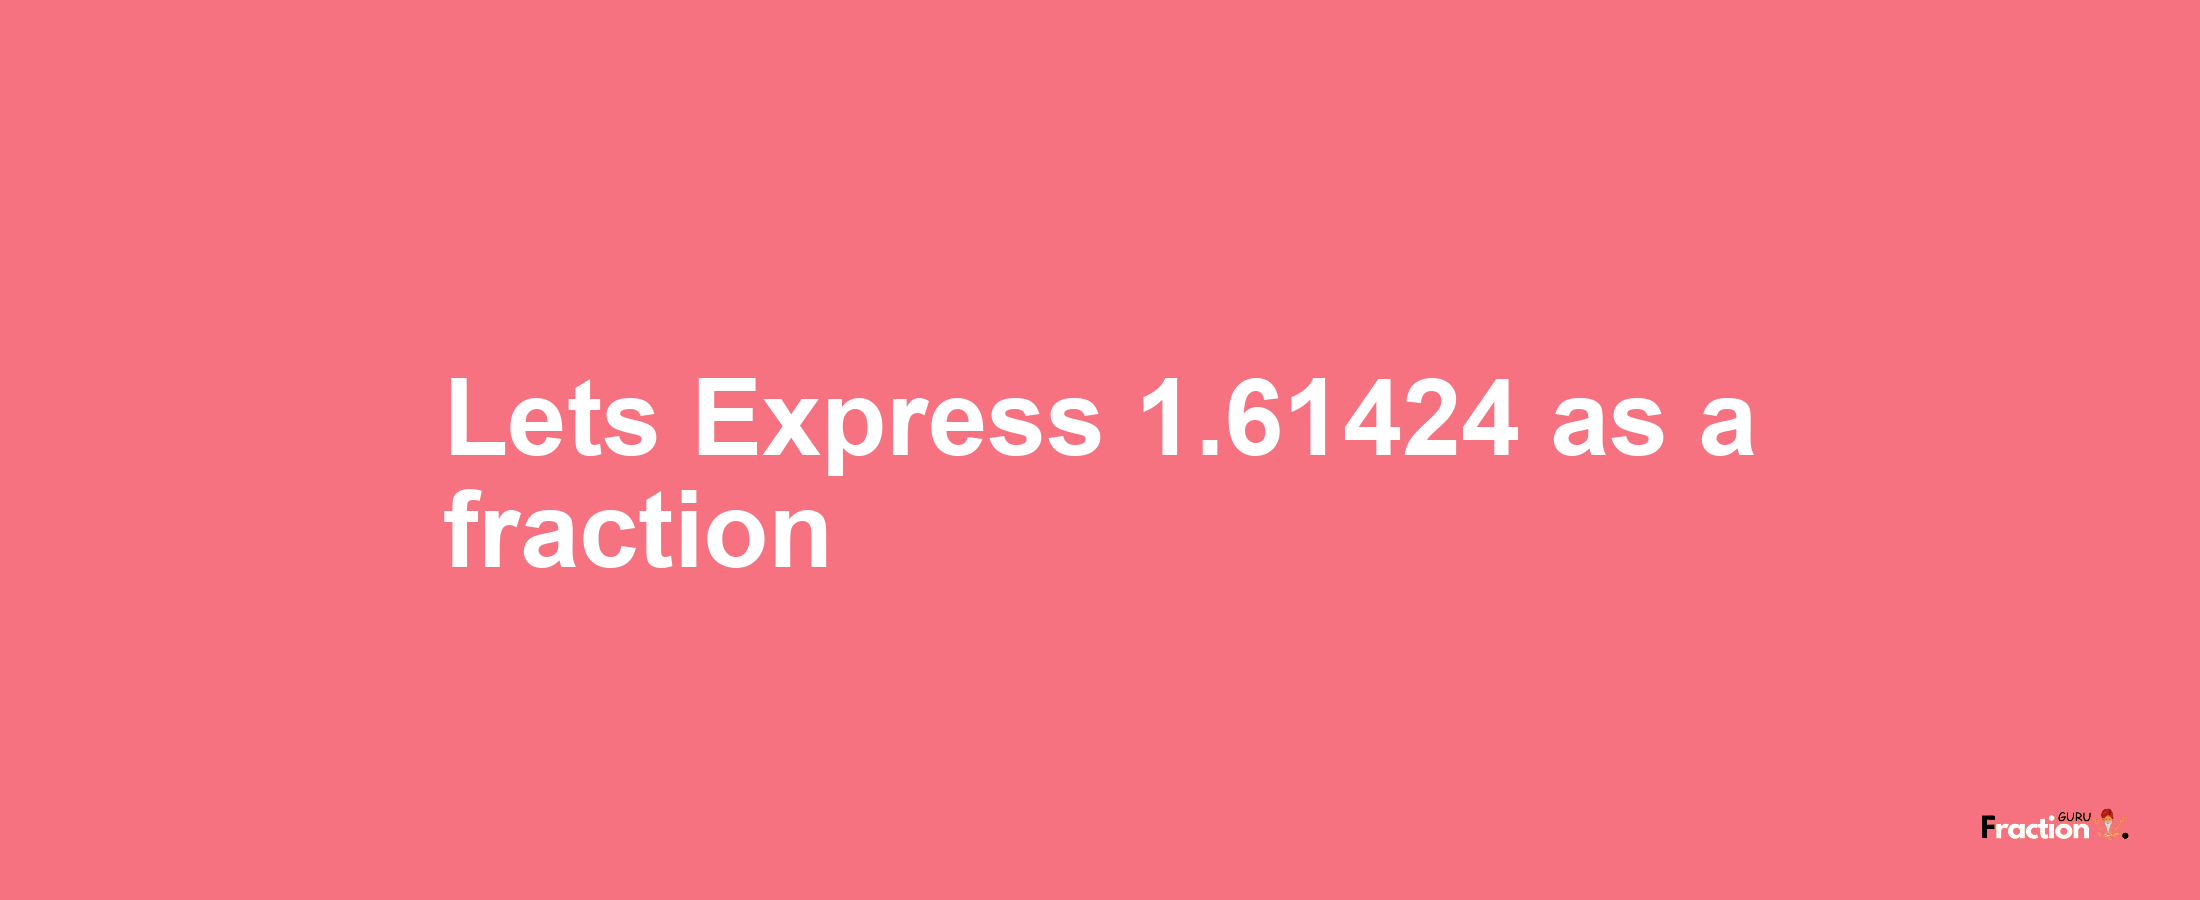 Lets Express 1.61424 as afraction